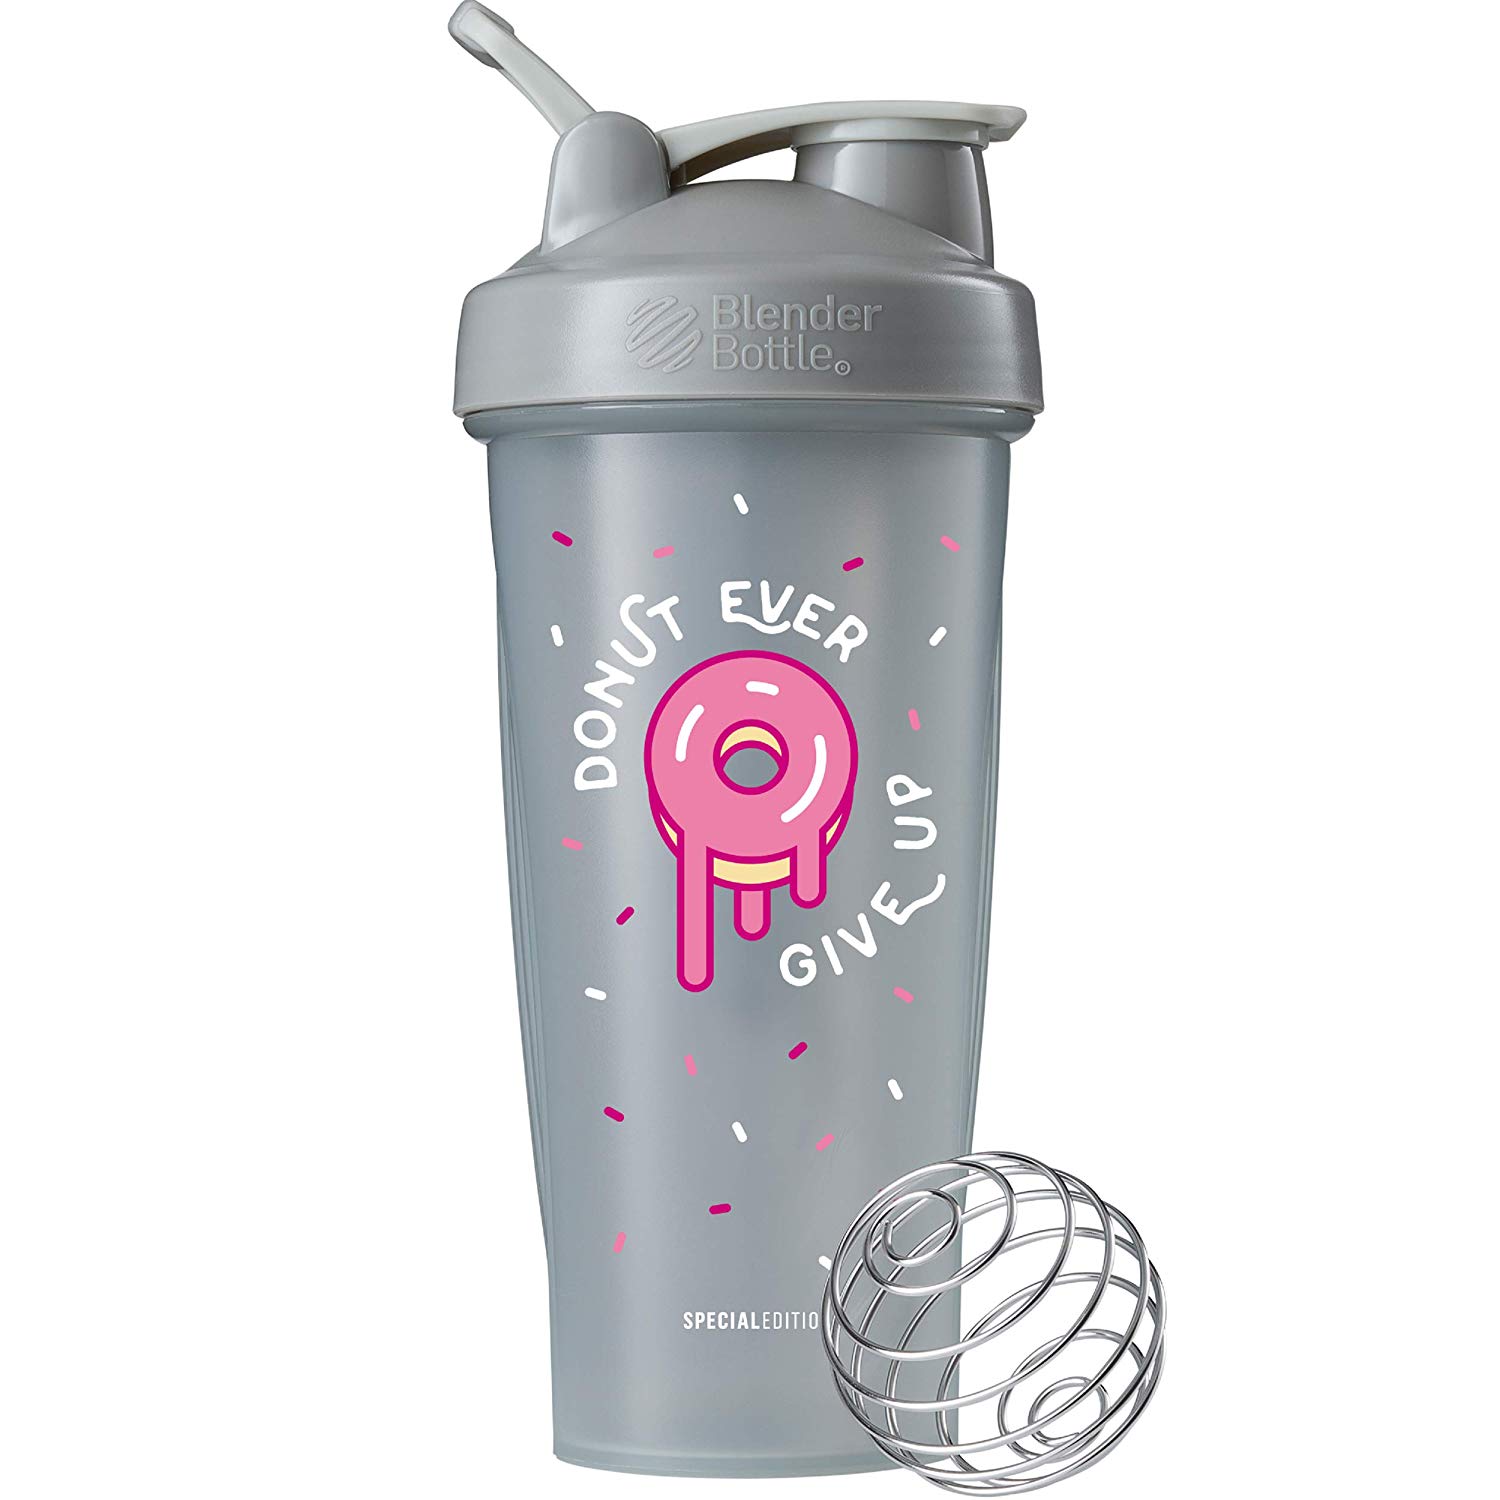 Wholesale Shaker Bottles From China | Lowest Factory Price